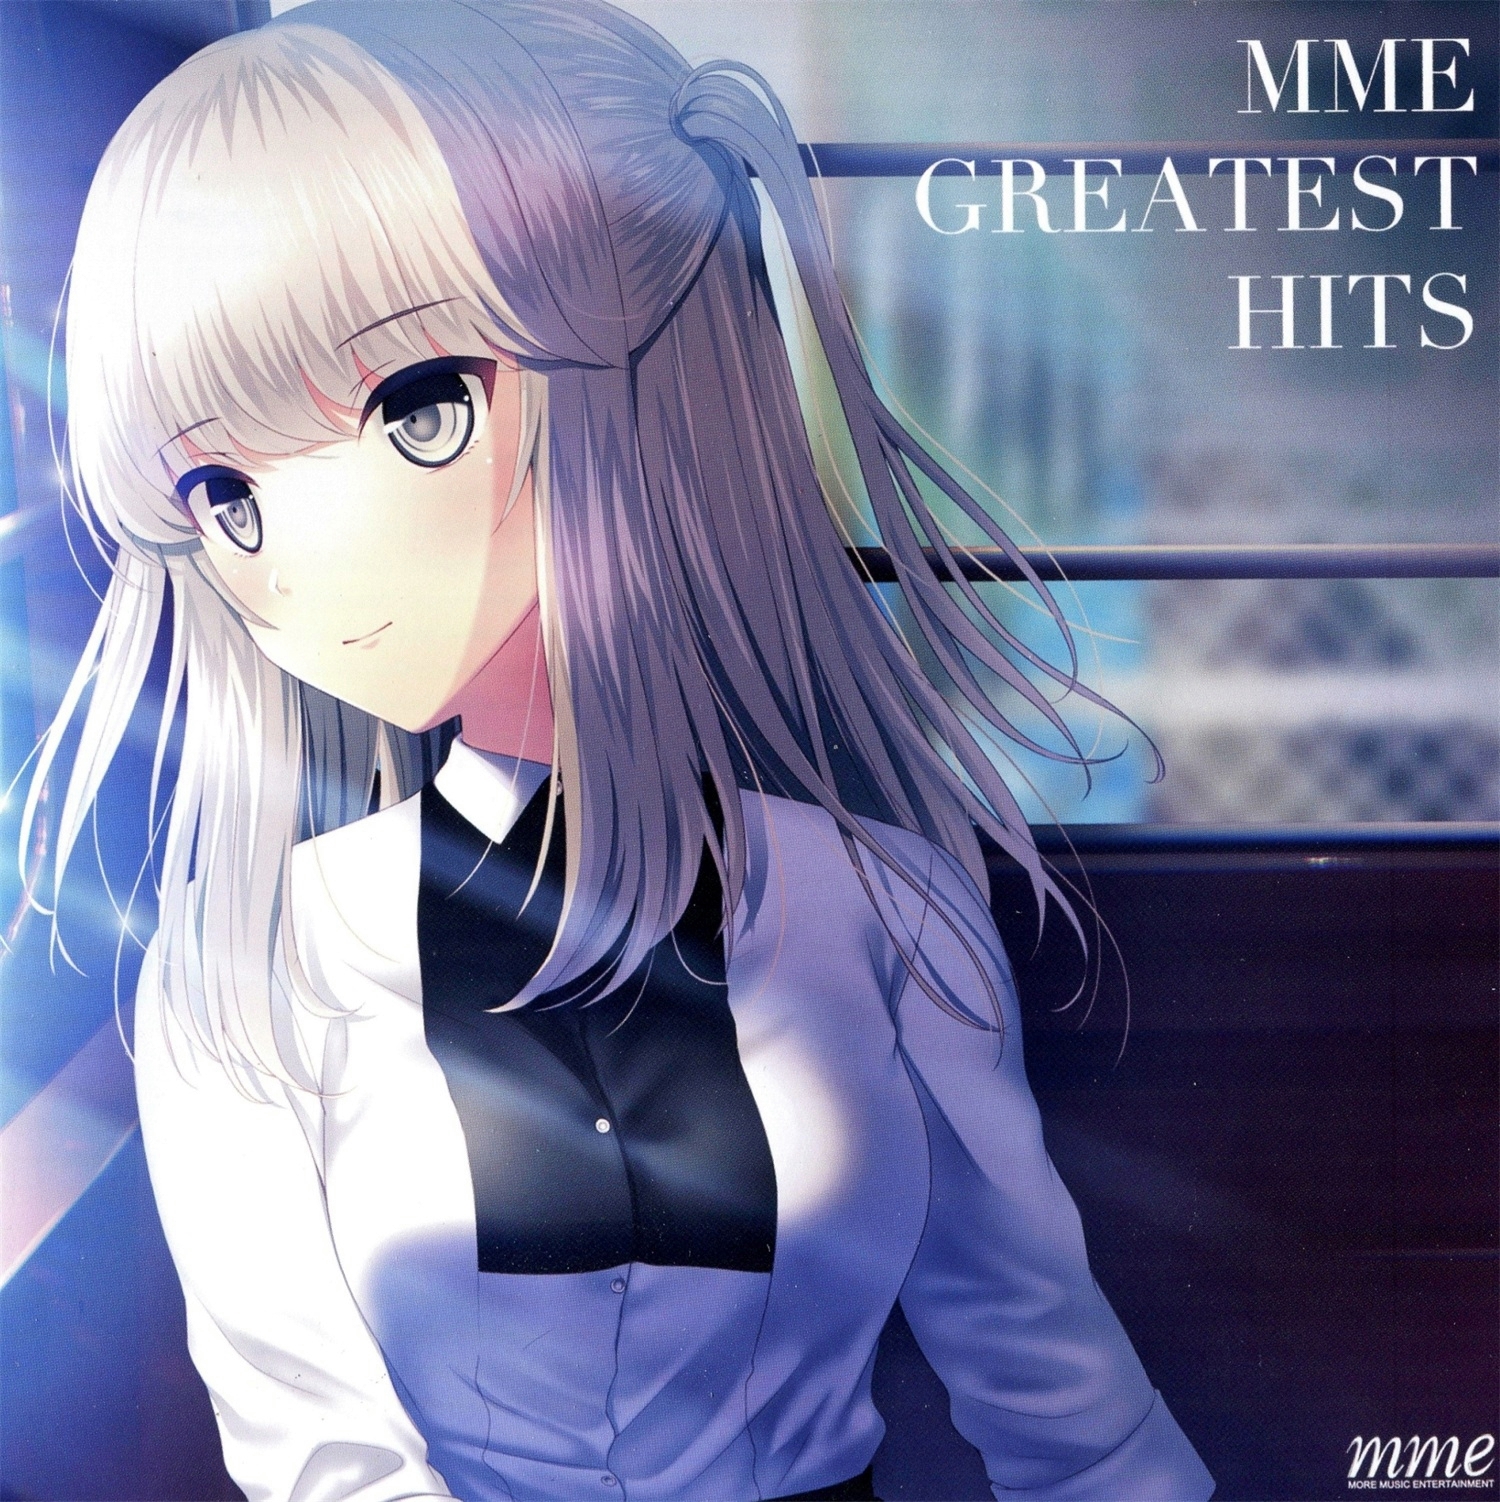 【WAV】MME GREATEST HITS／MORE MUSIC ENTERTAINMENT